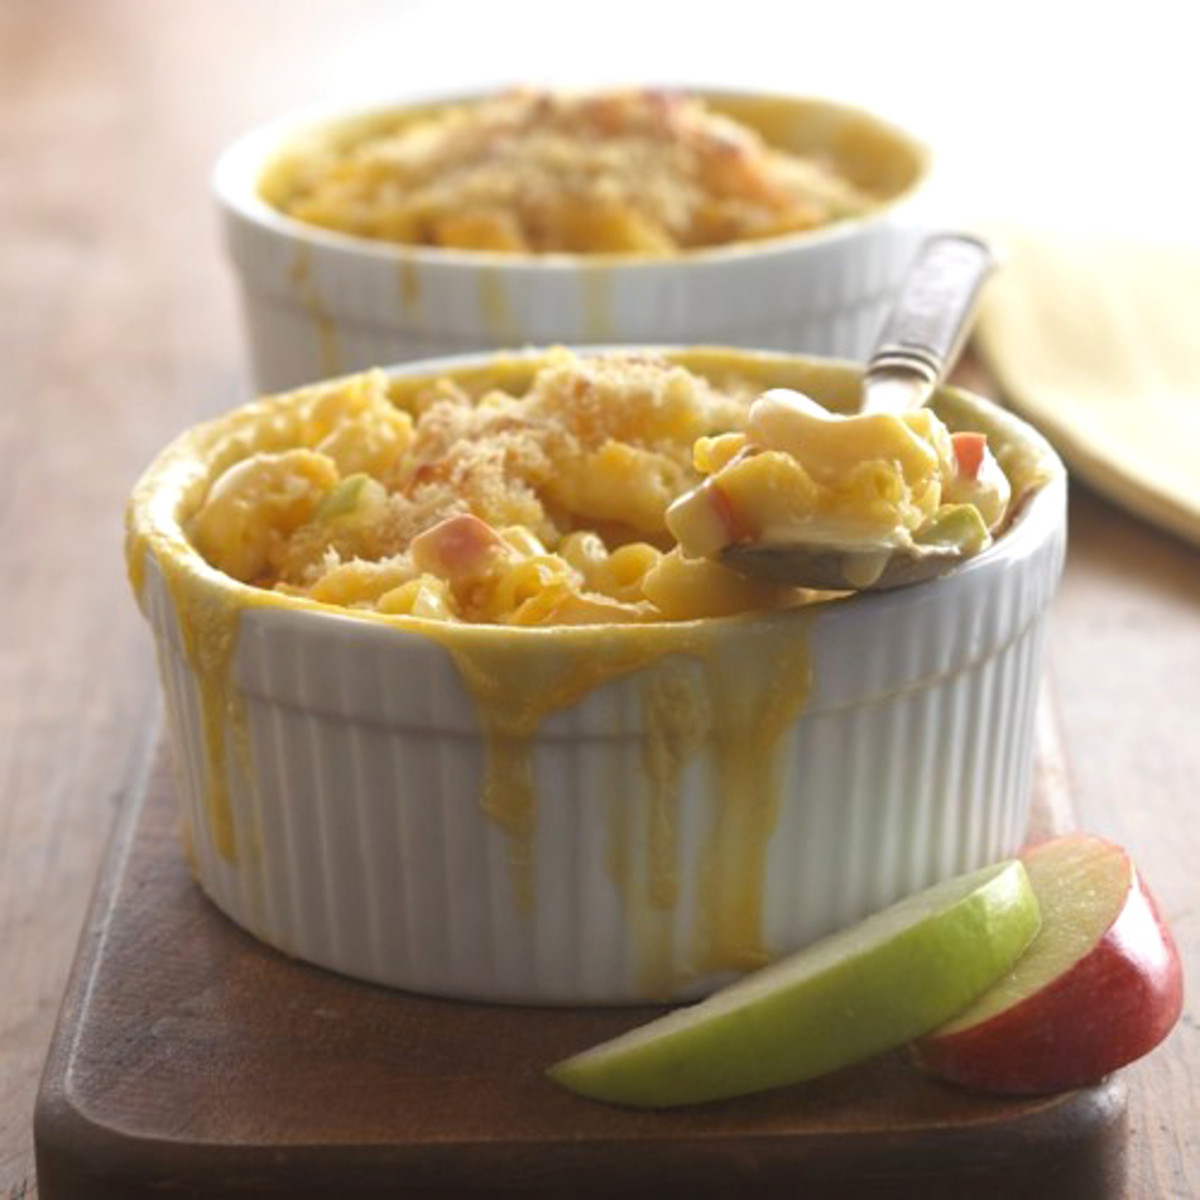 Apple-Cheddar Mac and Cheese